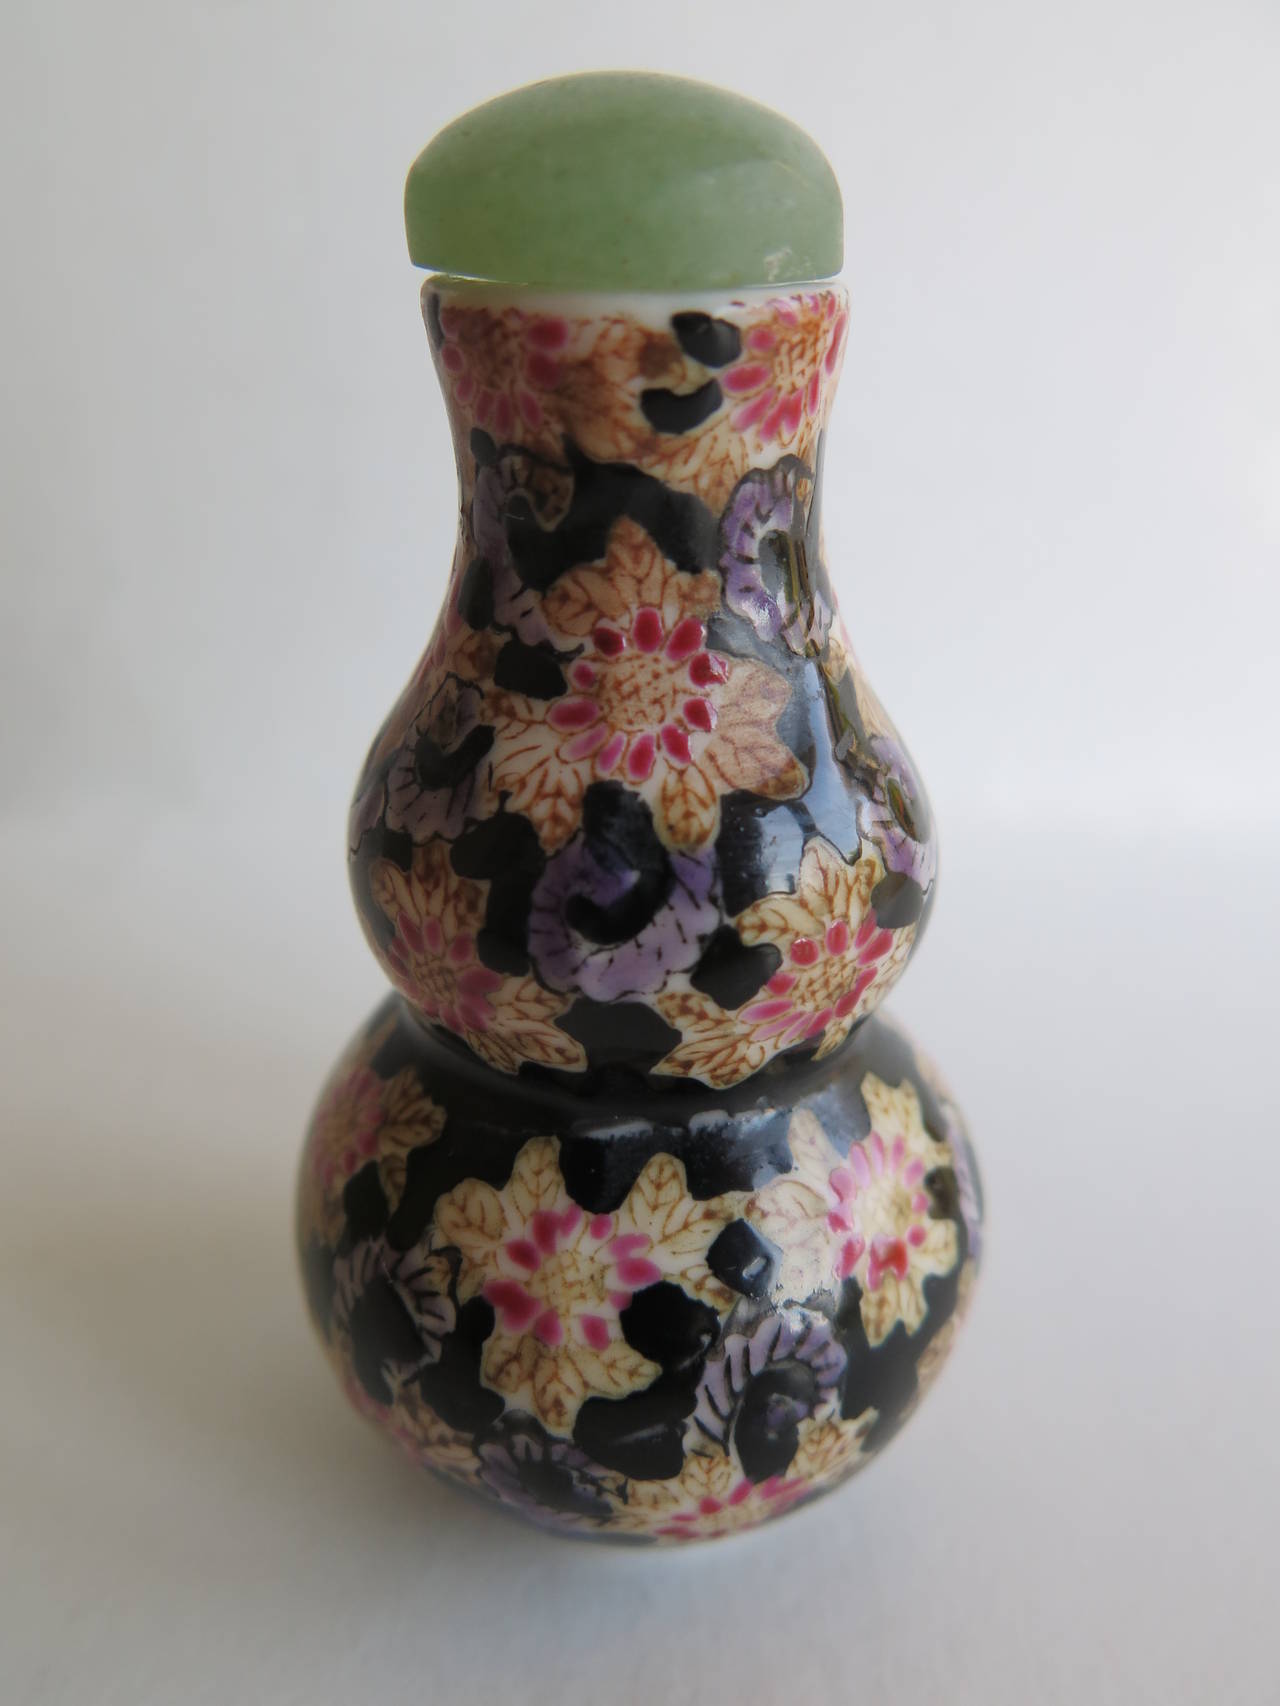 Hand-Crafted Chinese Snuff Bottle, Porcelain, Hand-Painted, Jade Top, Early 20th Century